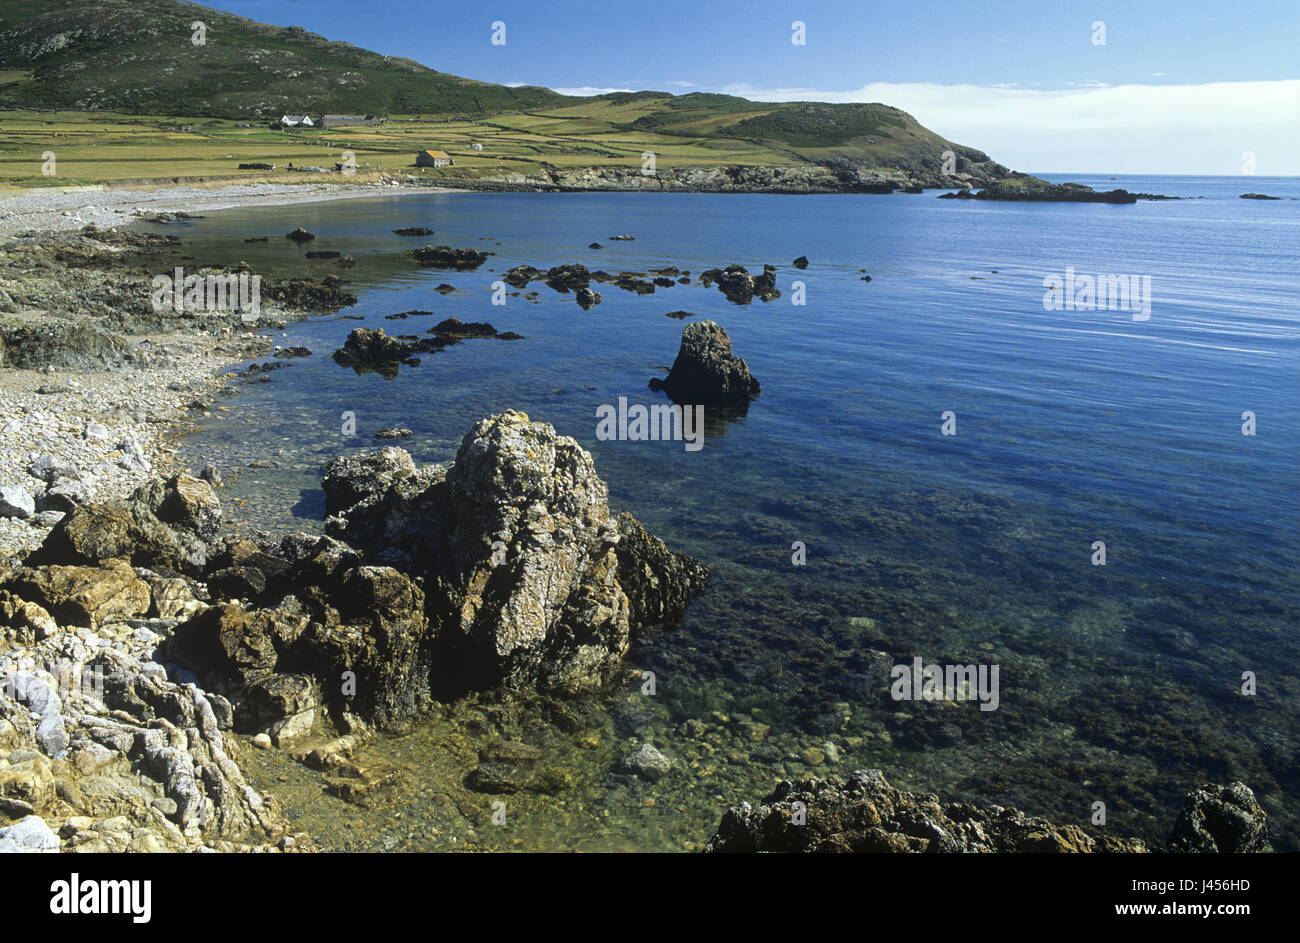 A rocky shore at high tide on Bardsey Island, off the coast of Wales, United Kingdom. Stock Photo